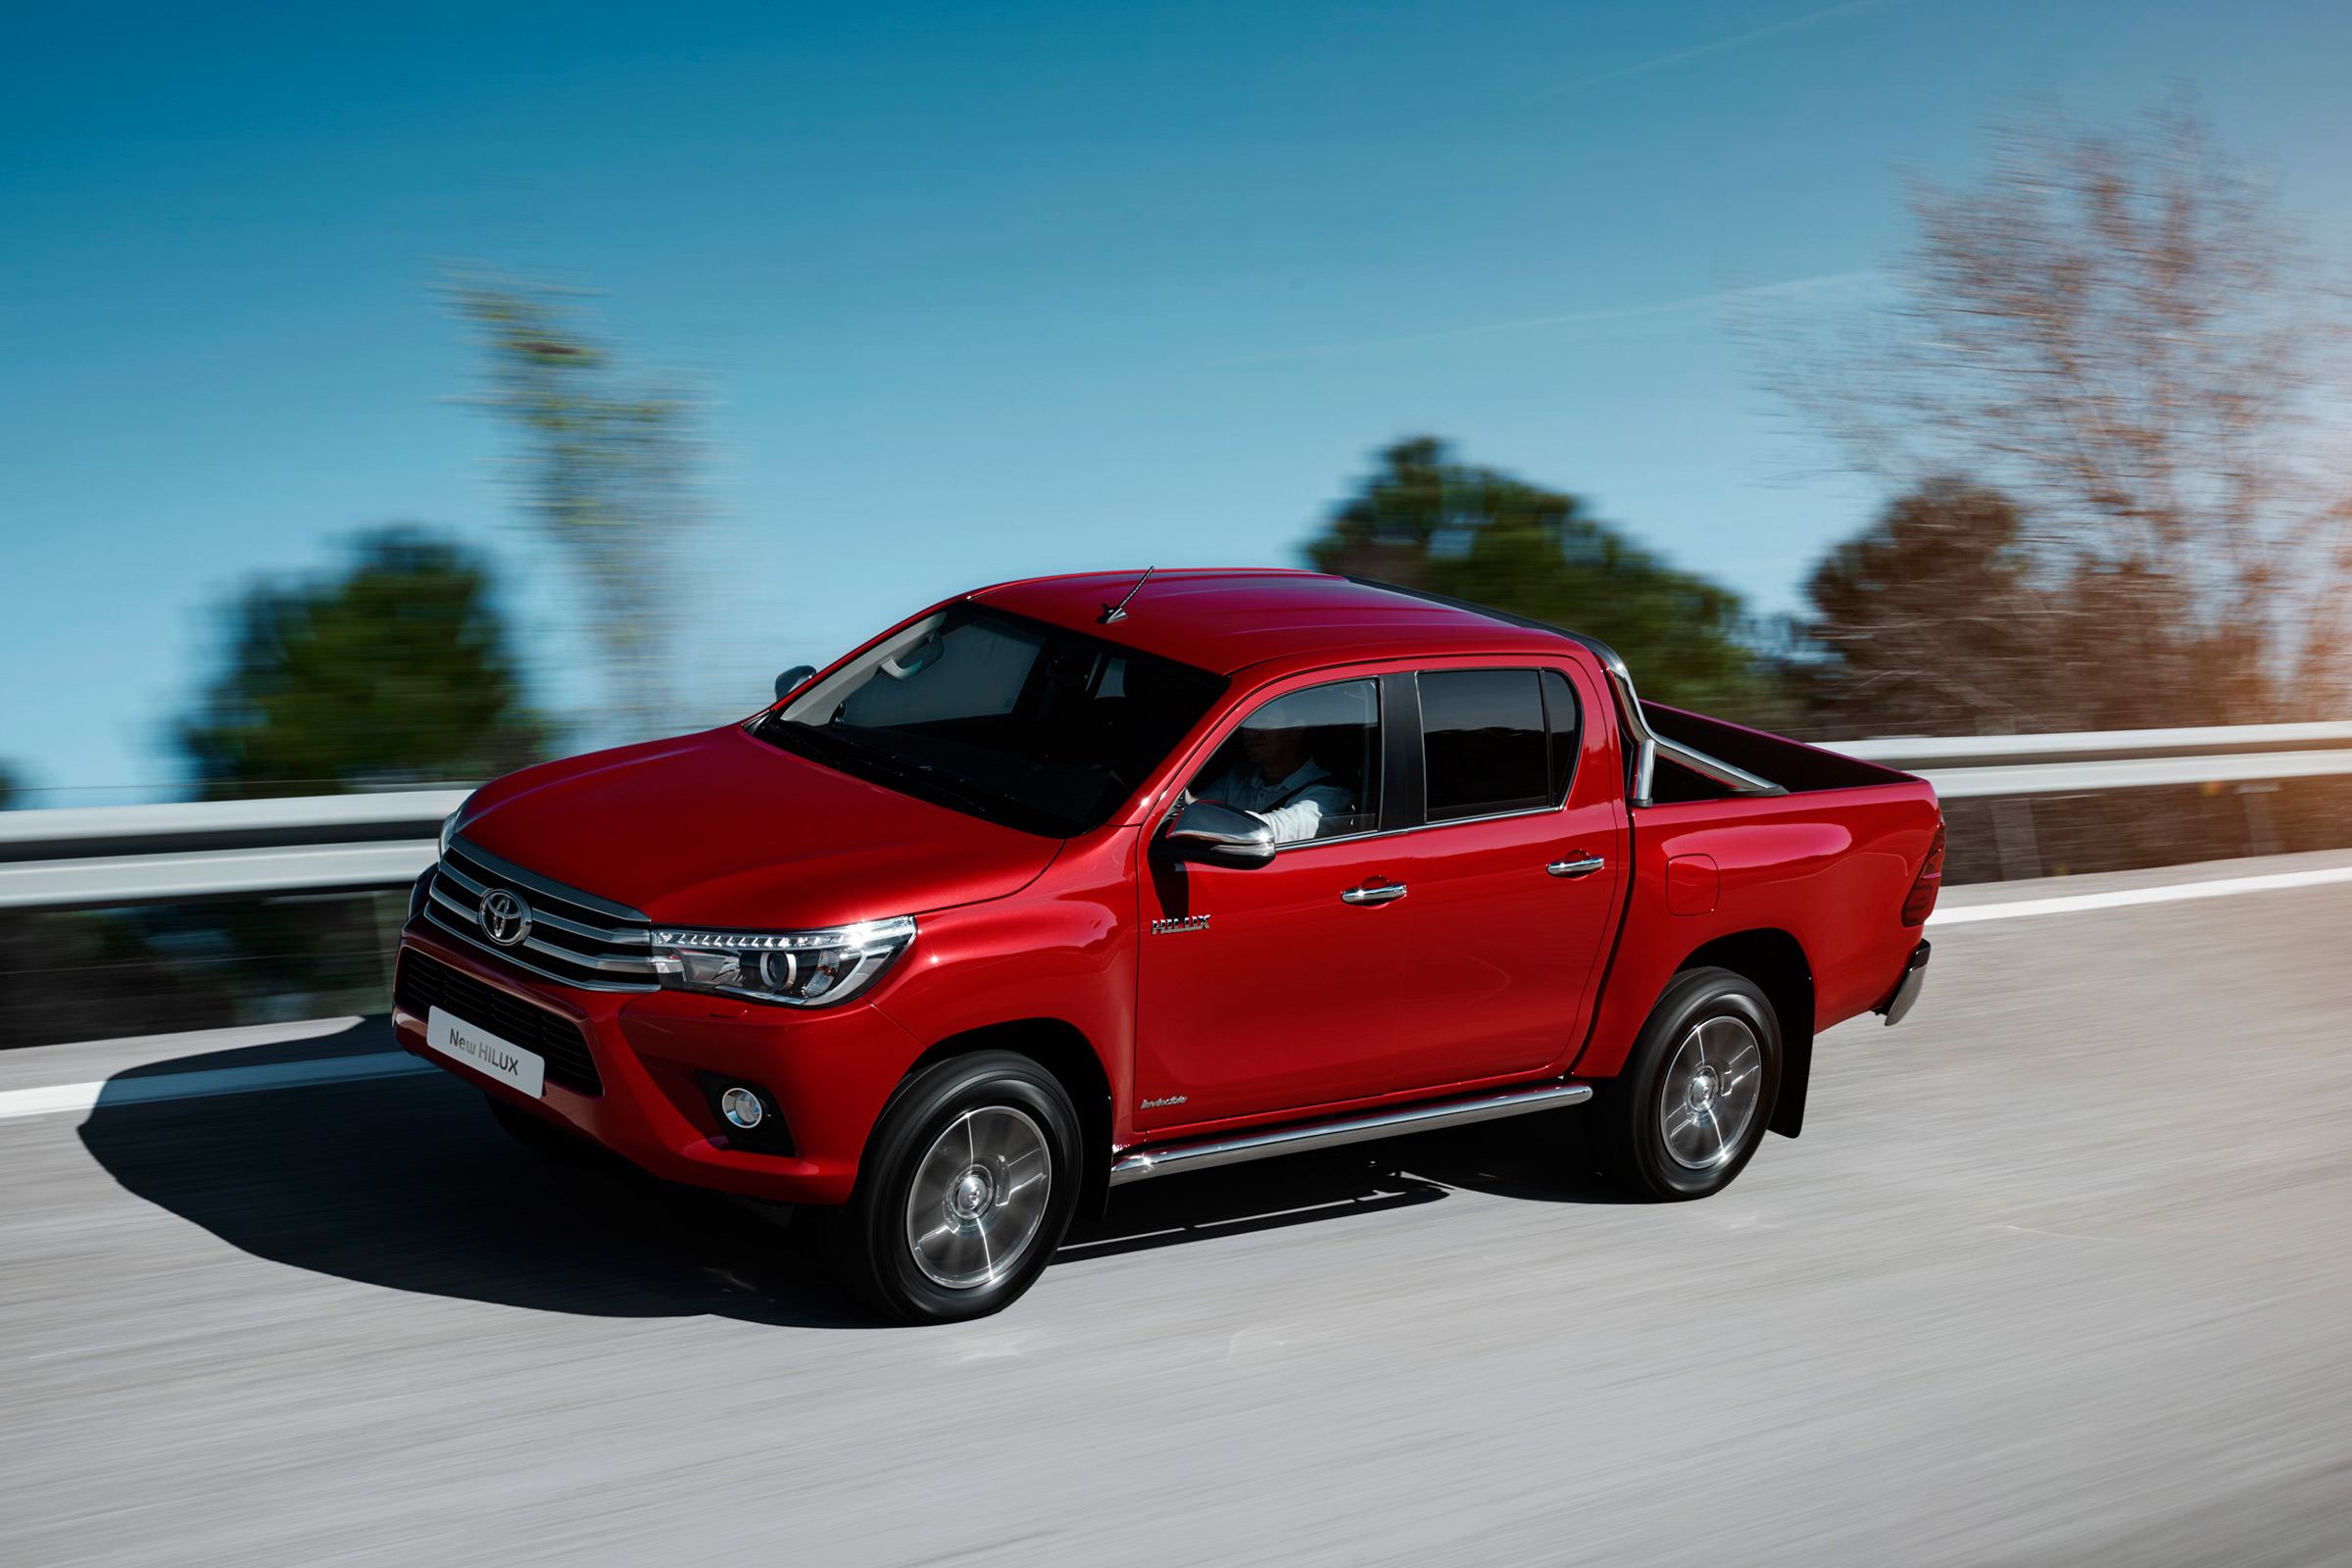 New 2016 Toyota Hilux: Prices and specs revealed | Auto ...